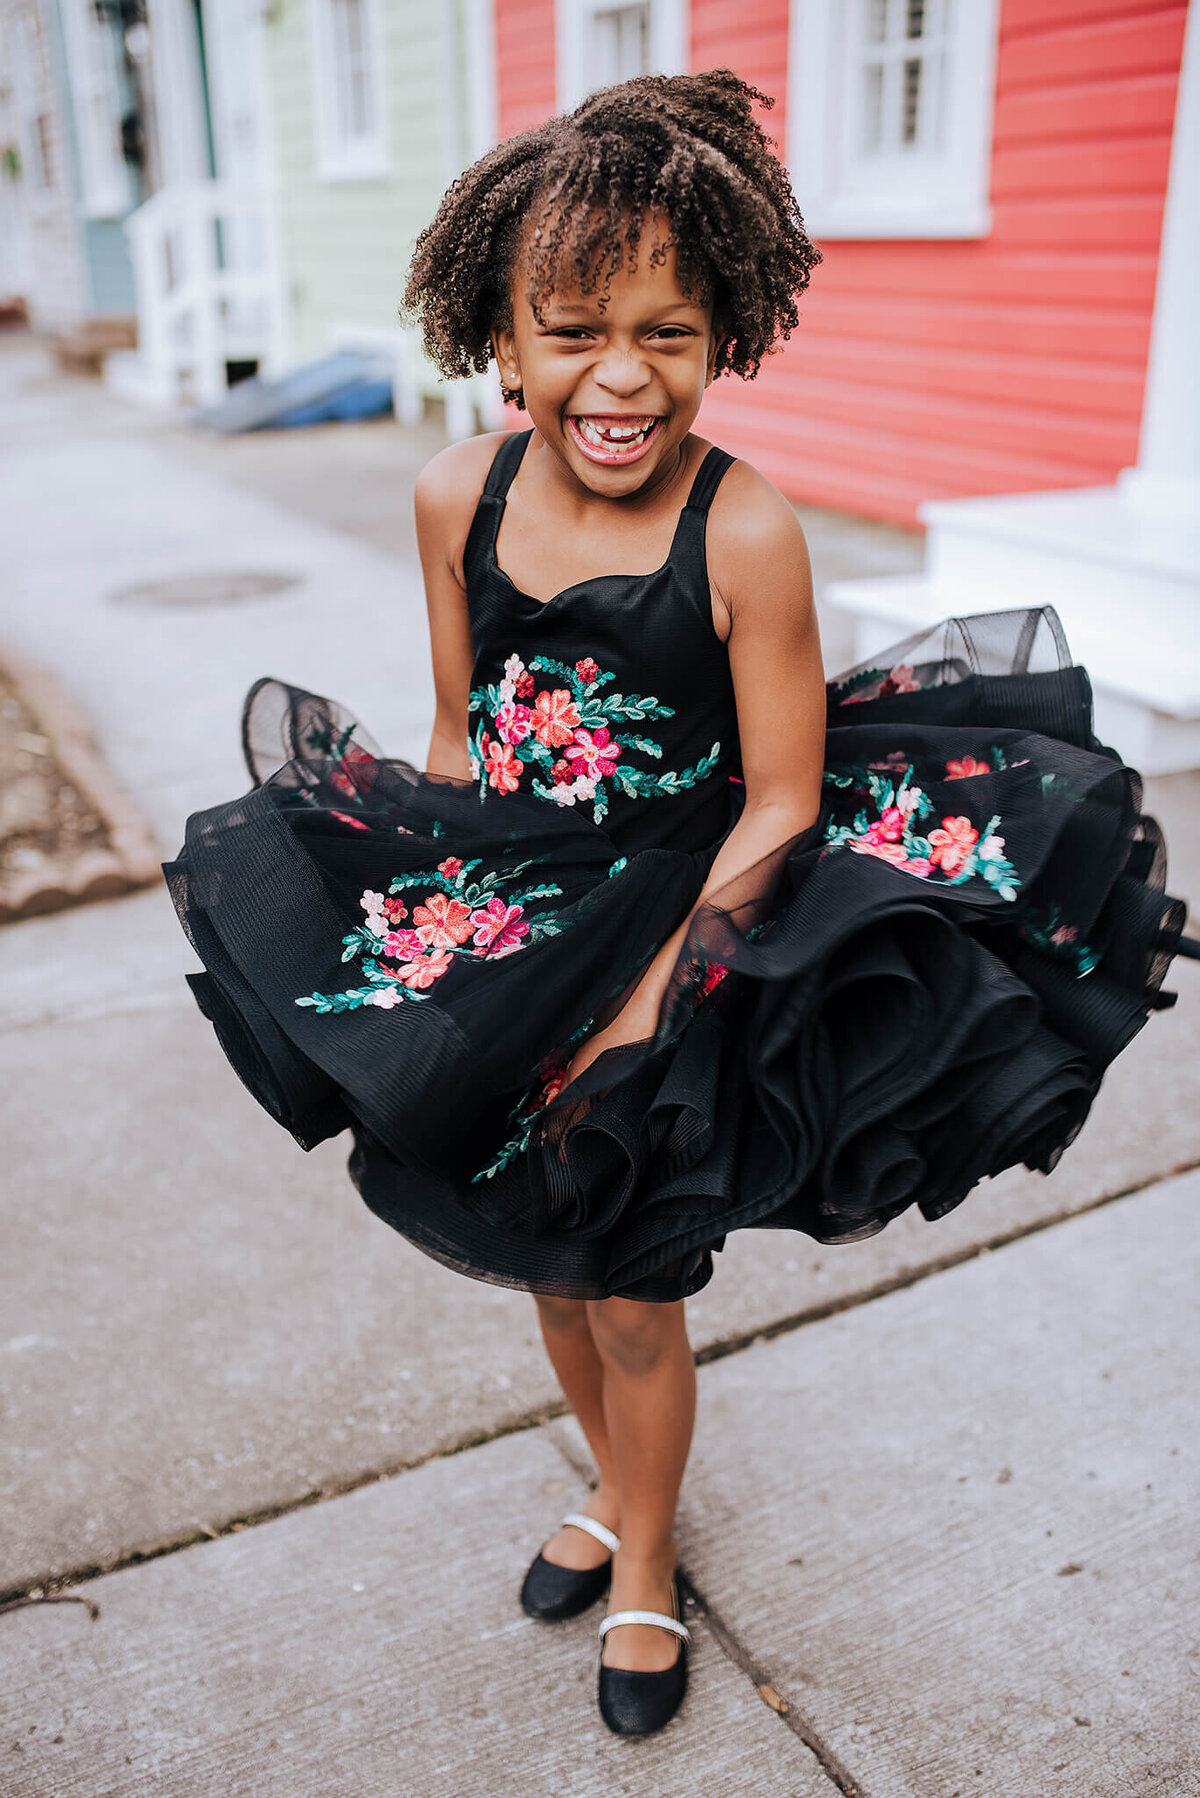 African American girl wearing black shoes and a black floral dress spinning and laughing in Fells Point Baltimore Maryland